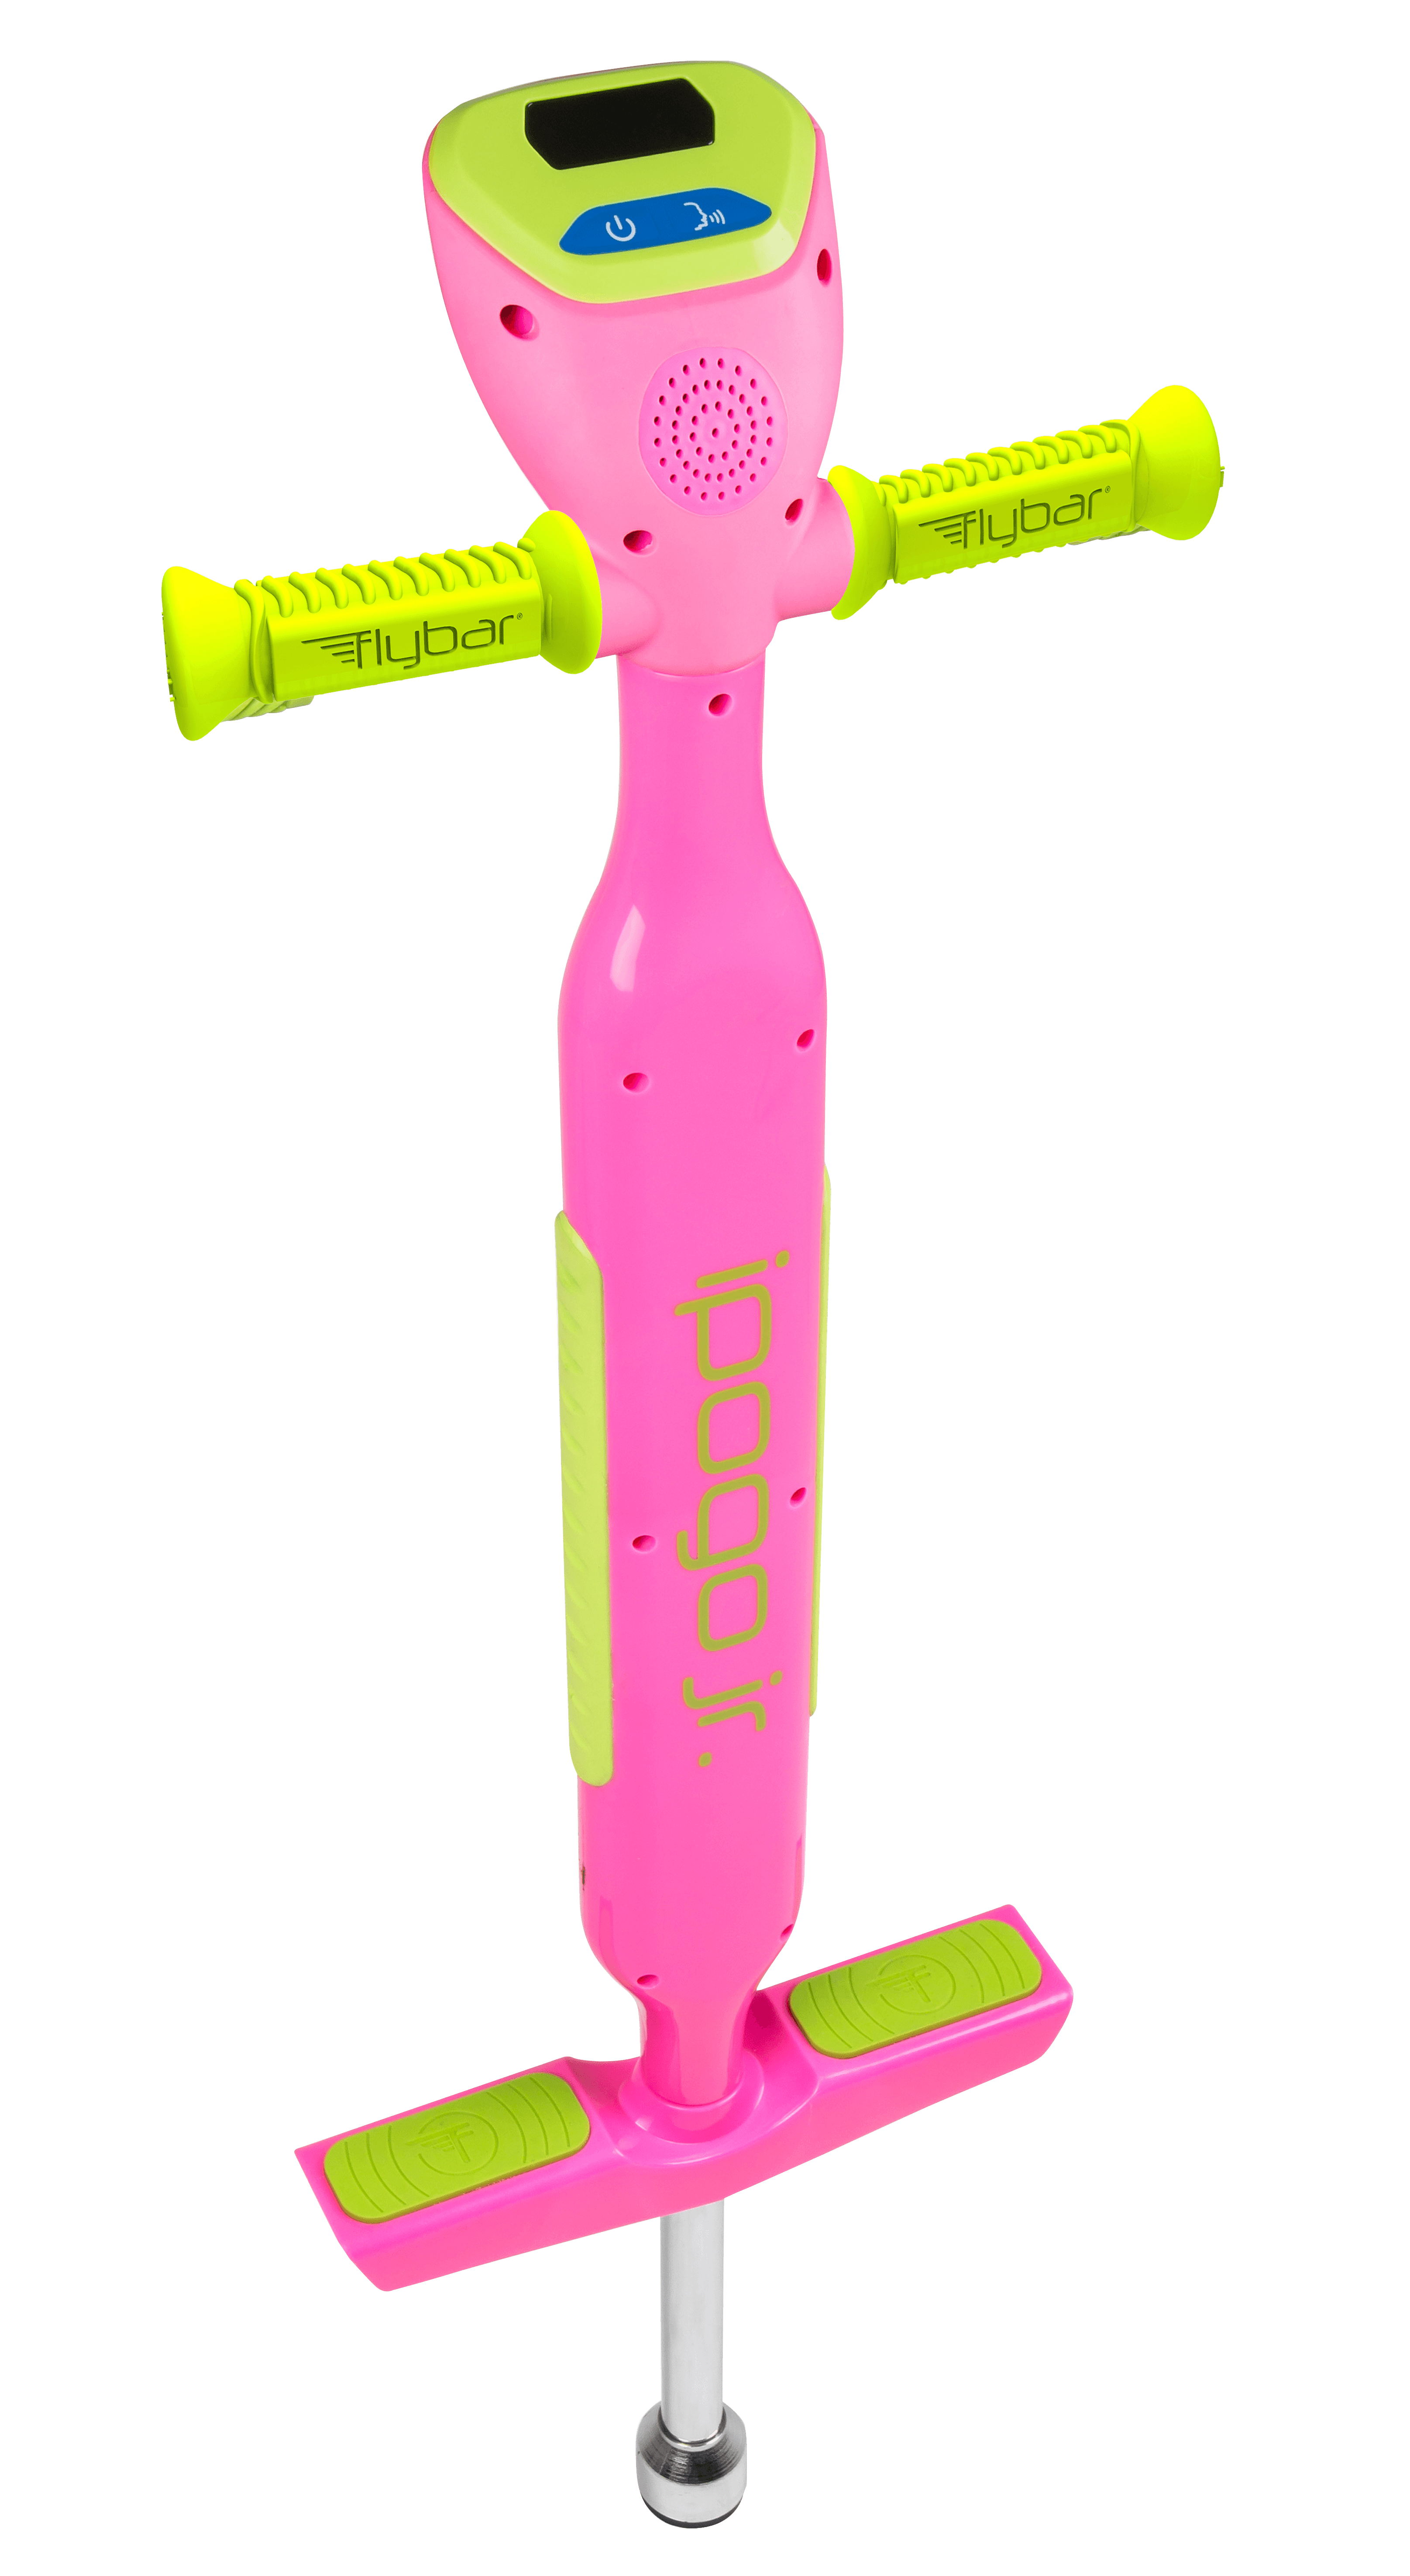 FlybariPogo Jr. Interactive Pogo Stick For Kids Boys & Girls Aged 5+, 40 to 80 lbs